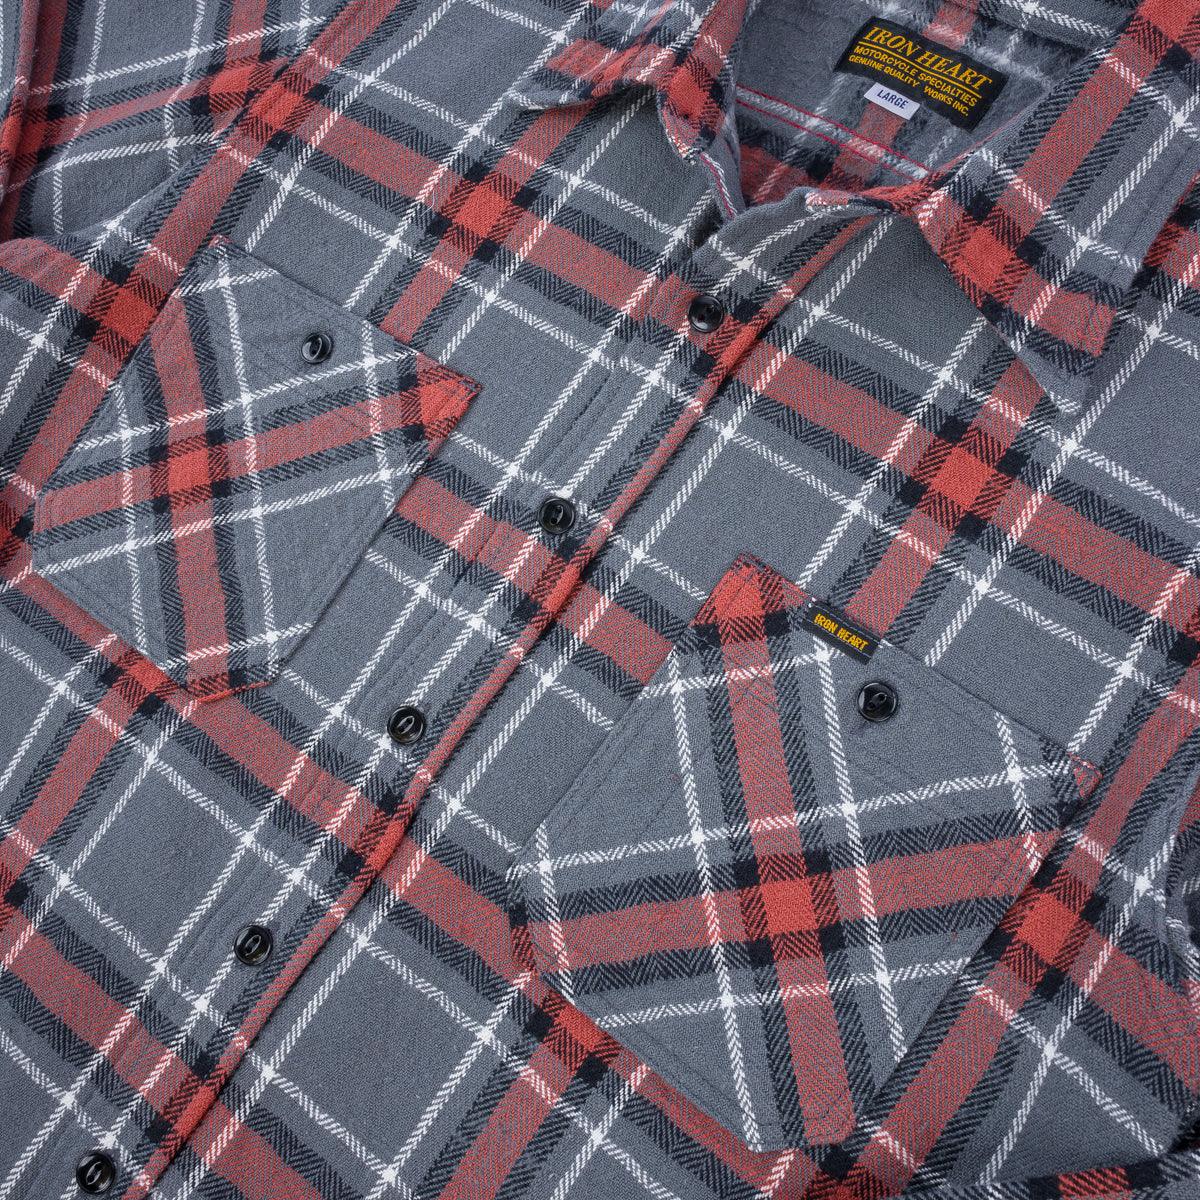 Image showing the IHSH-375-GRY - 12oz Slubby Heavy Flannel Herringbone Check Work Shirt - Grey which is a Shirts described by the following info Iron Heart, Released, Shirts, Tops and sold on the IRON HEART GERMANY online store